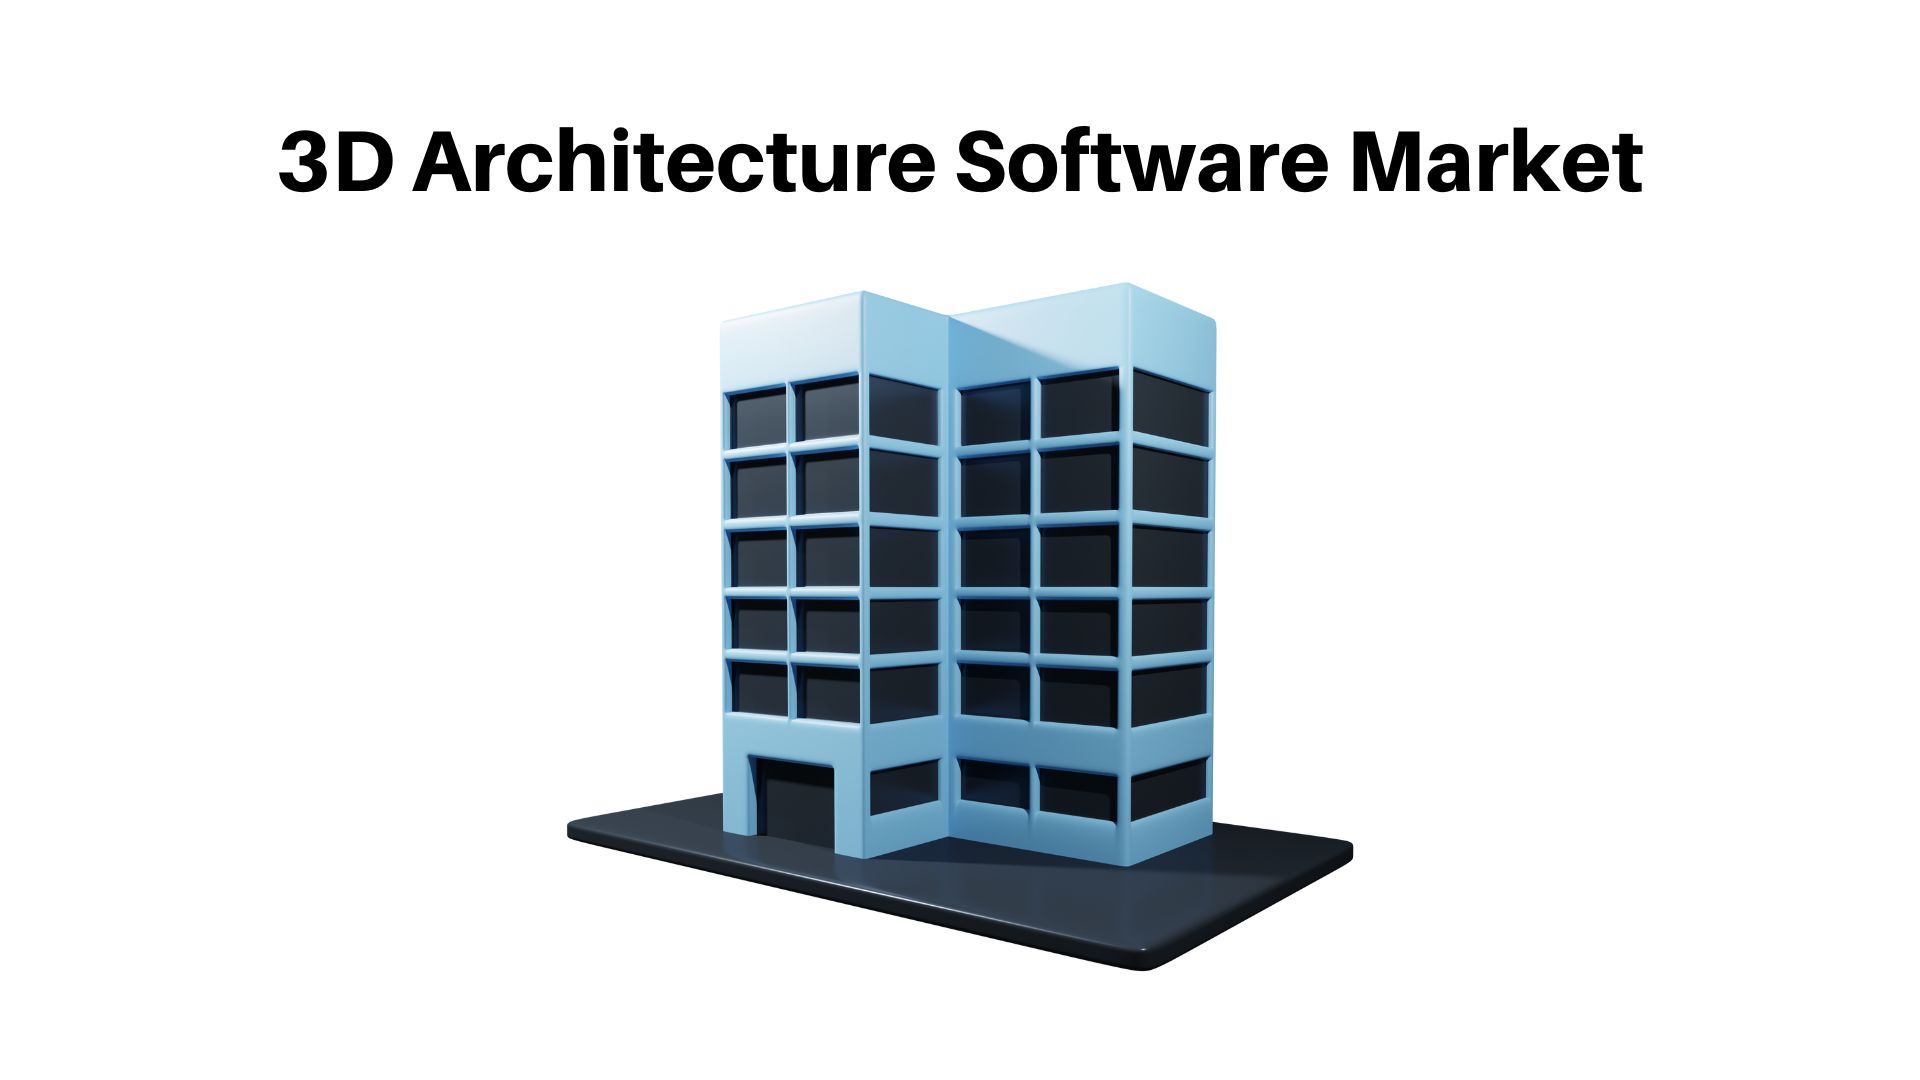 3D Architecture Software Market Expected To Reach CAGR Value Of Over 12% By 2032